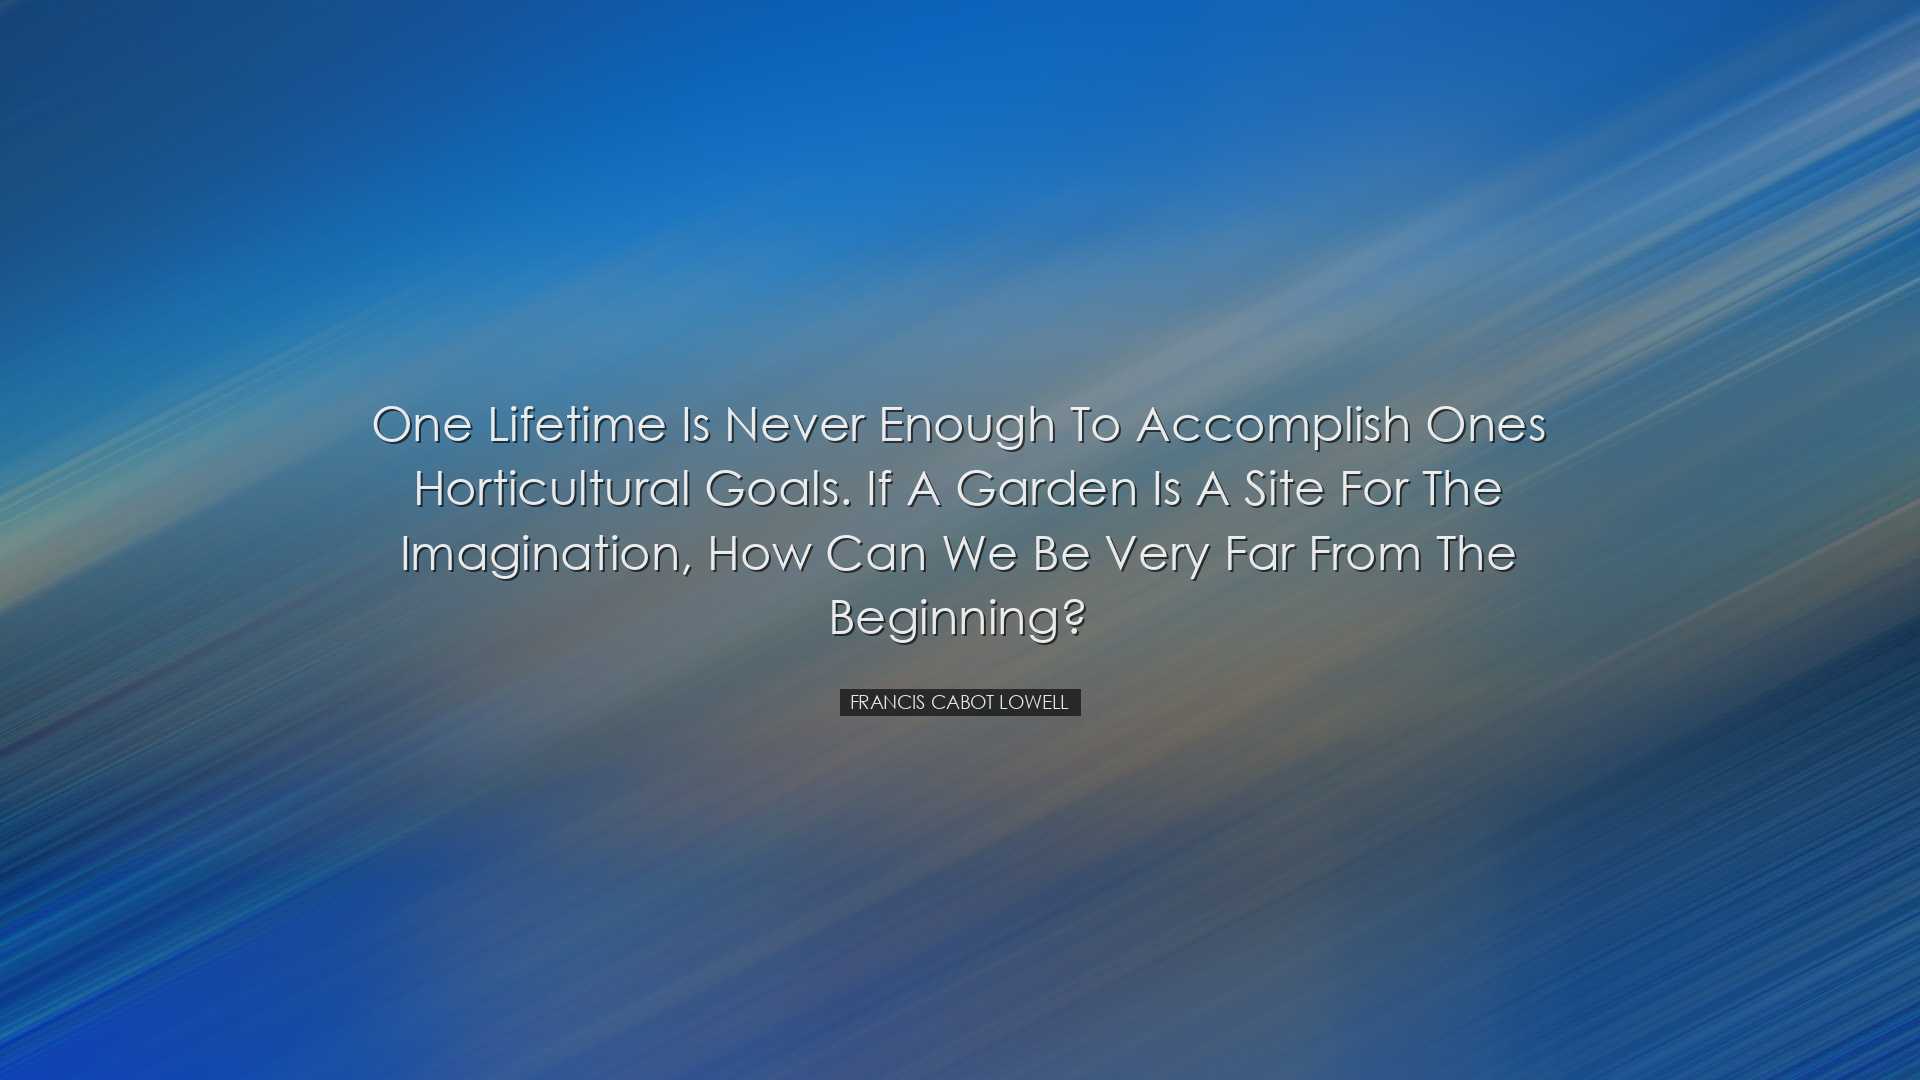 One lifetime is never enough to accomplish ones horticultural goal